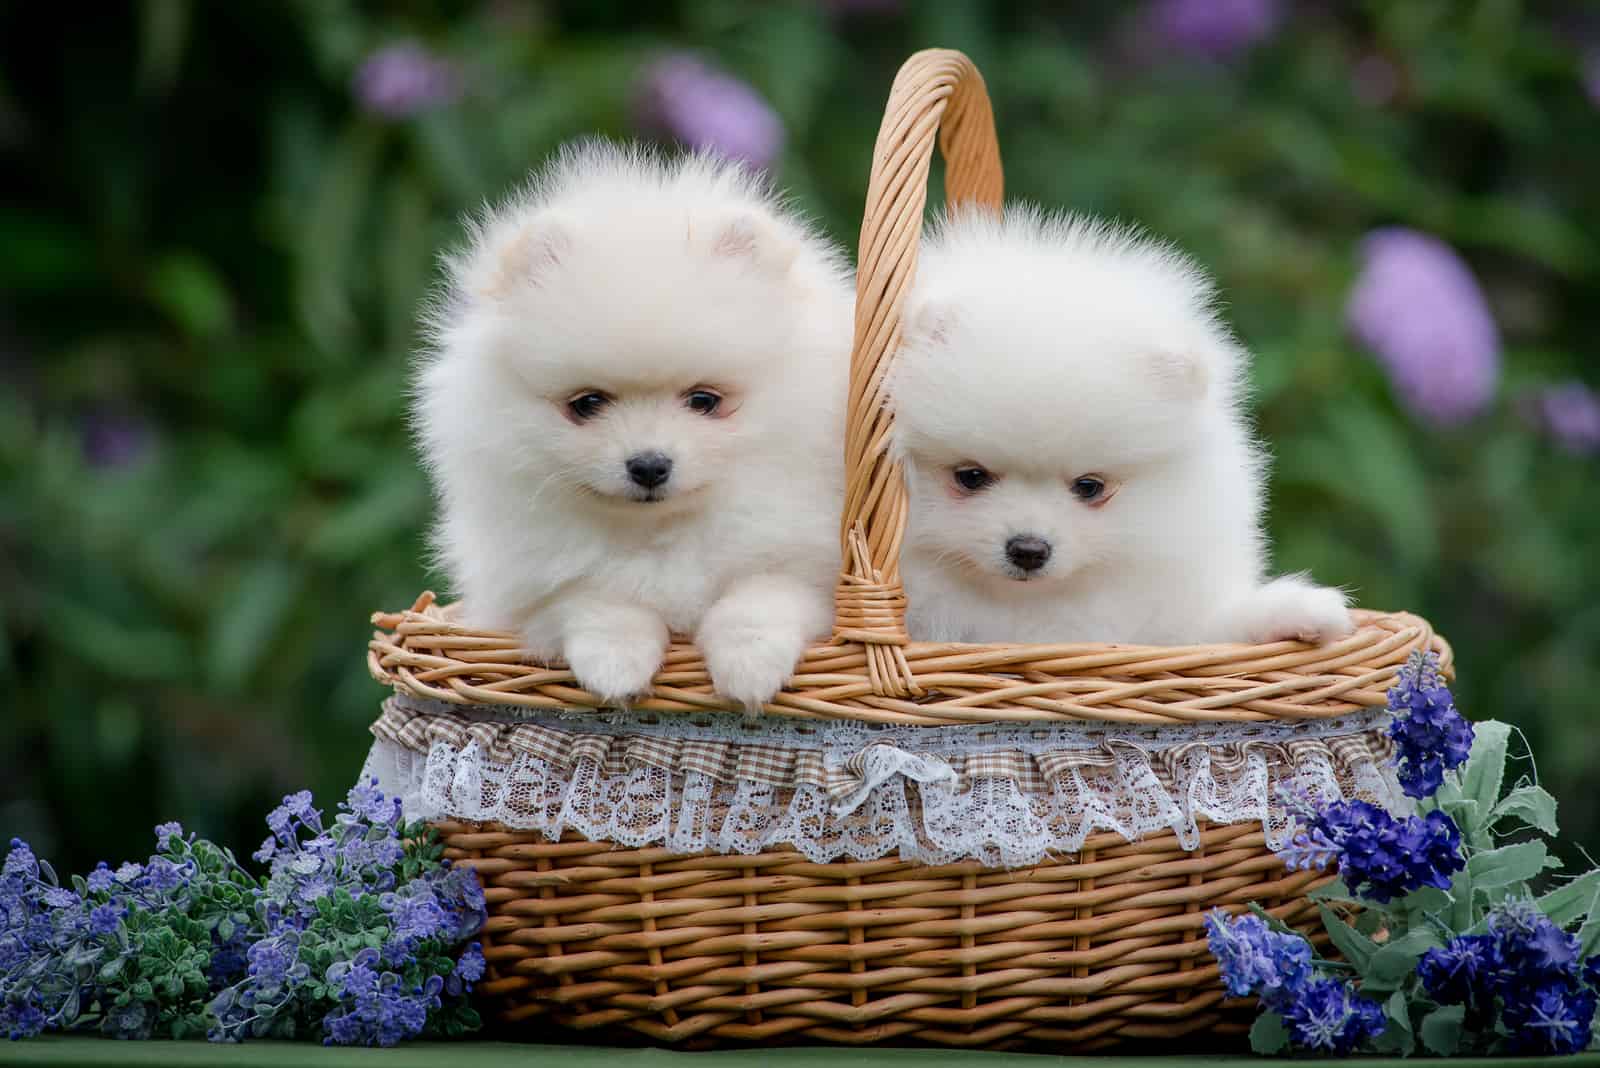 two cute white puppies of the breed Pomeranian